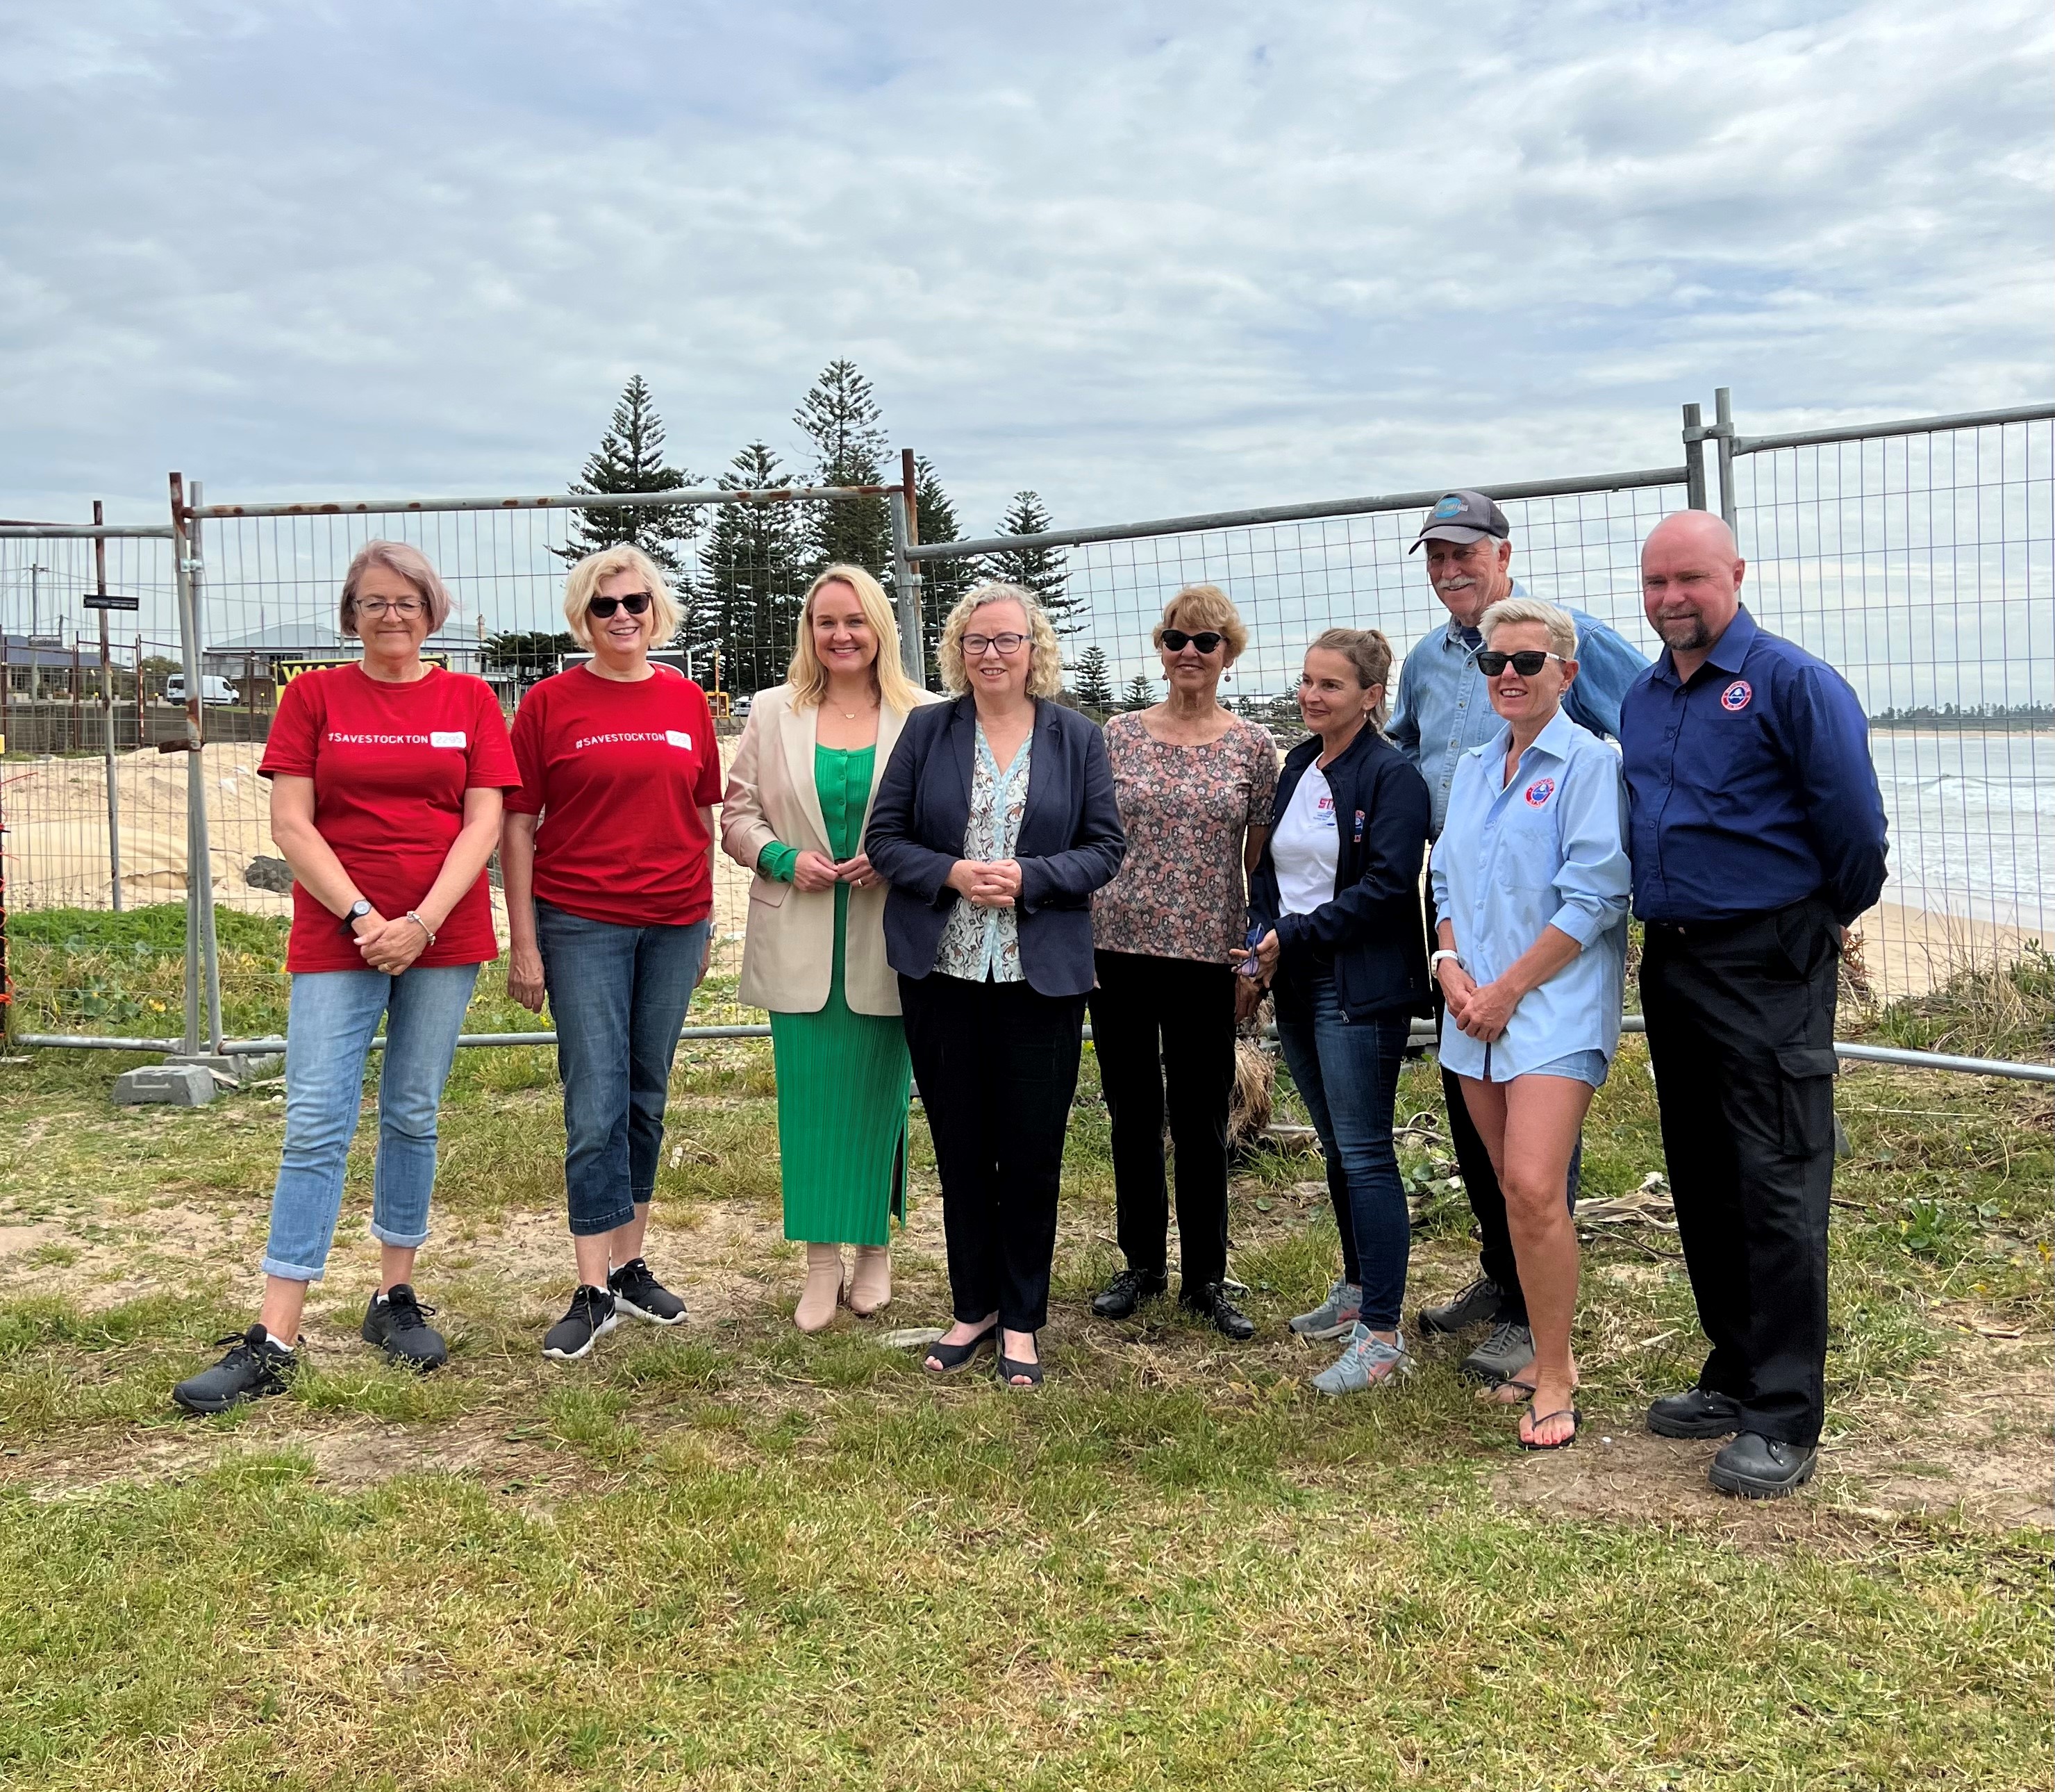 Picture caption: Lord Mayor Nuatali Nelmes with Federal Member for Newcastle Sharon Claydon MP and members of the Stockton community.